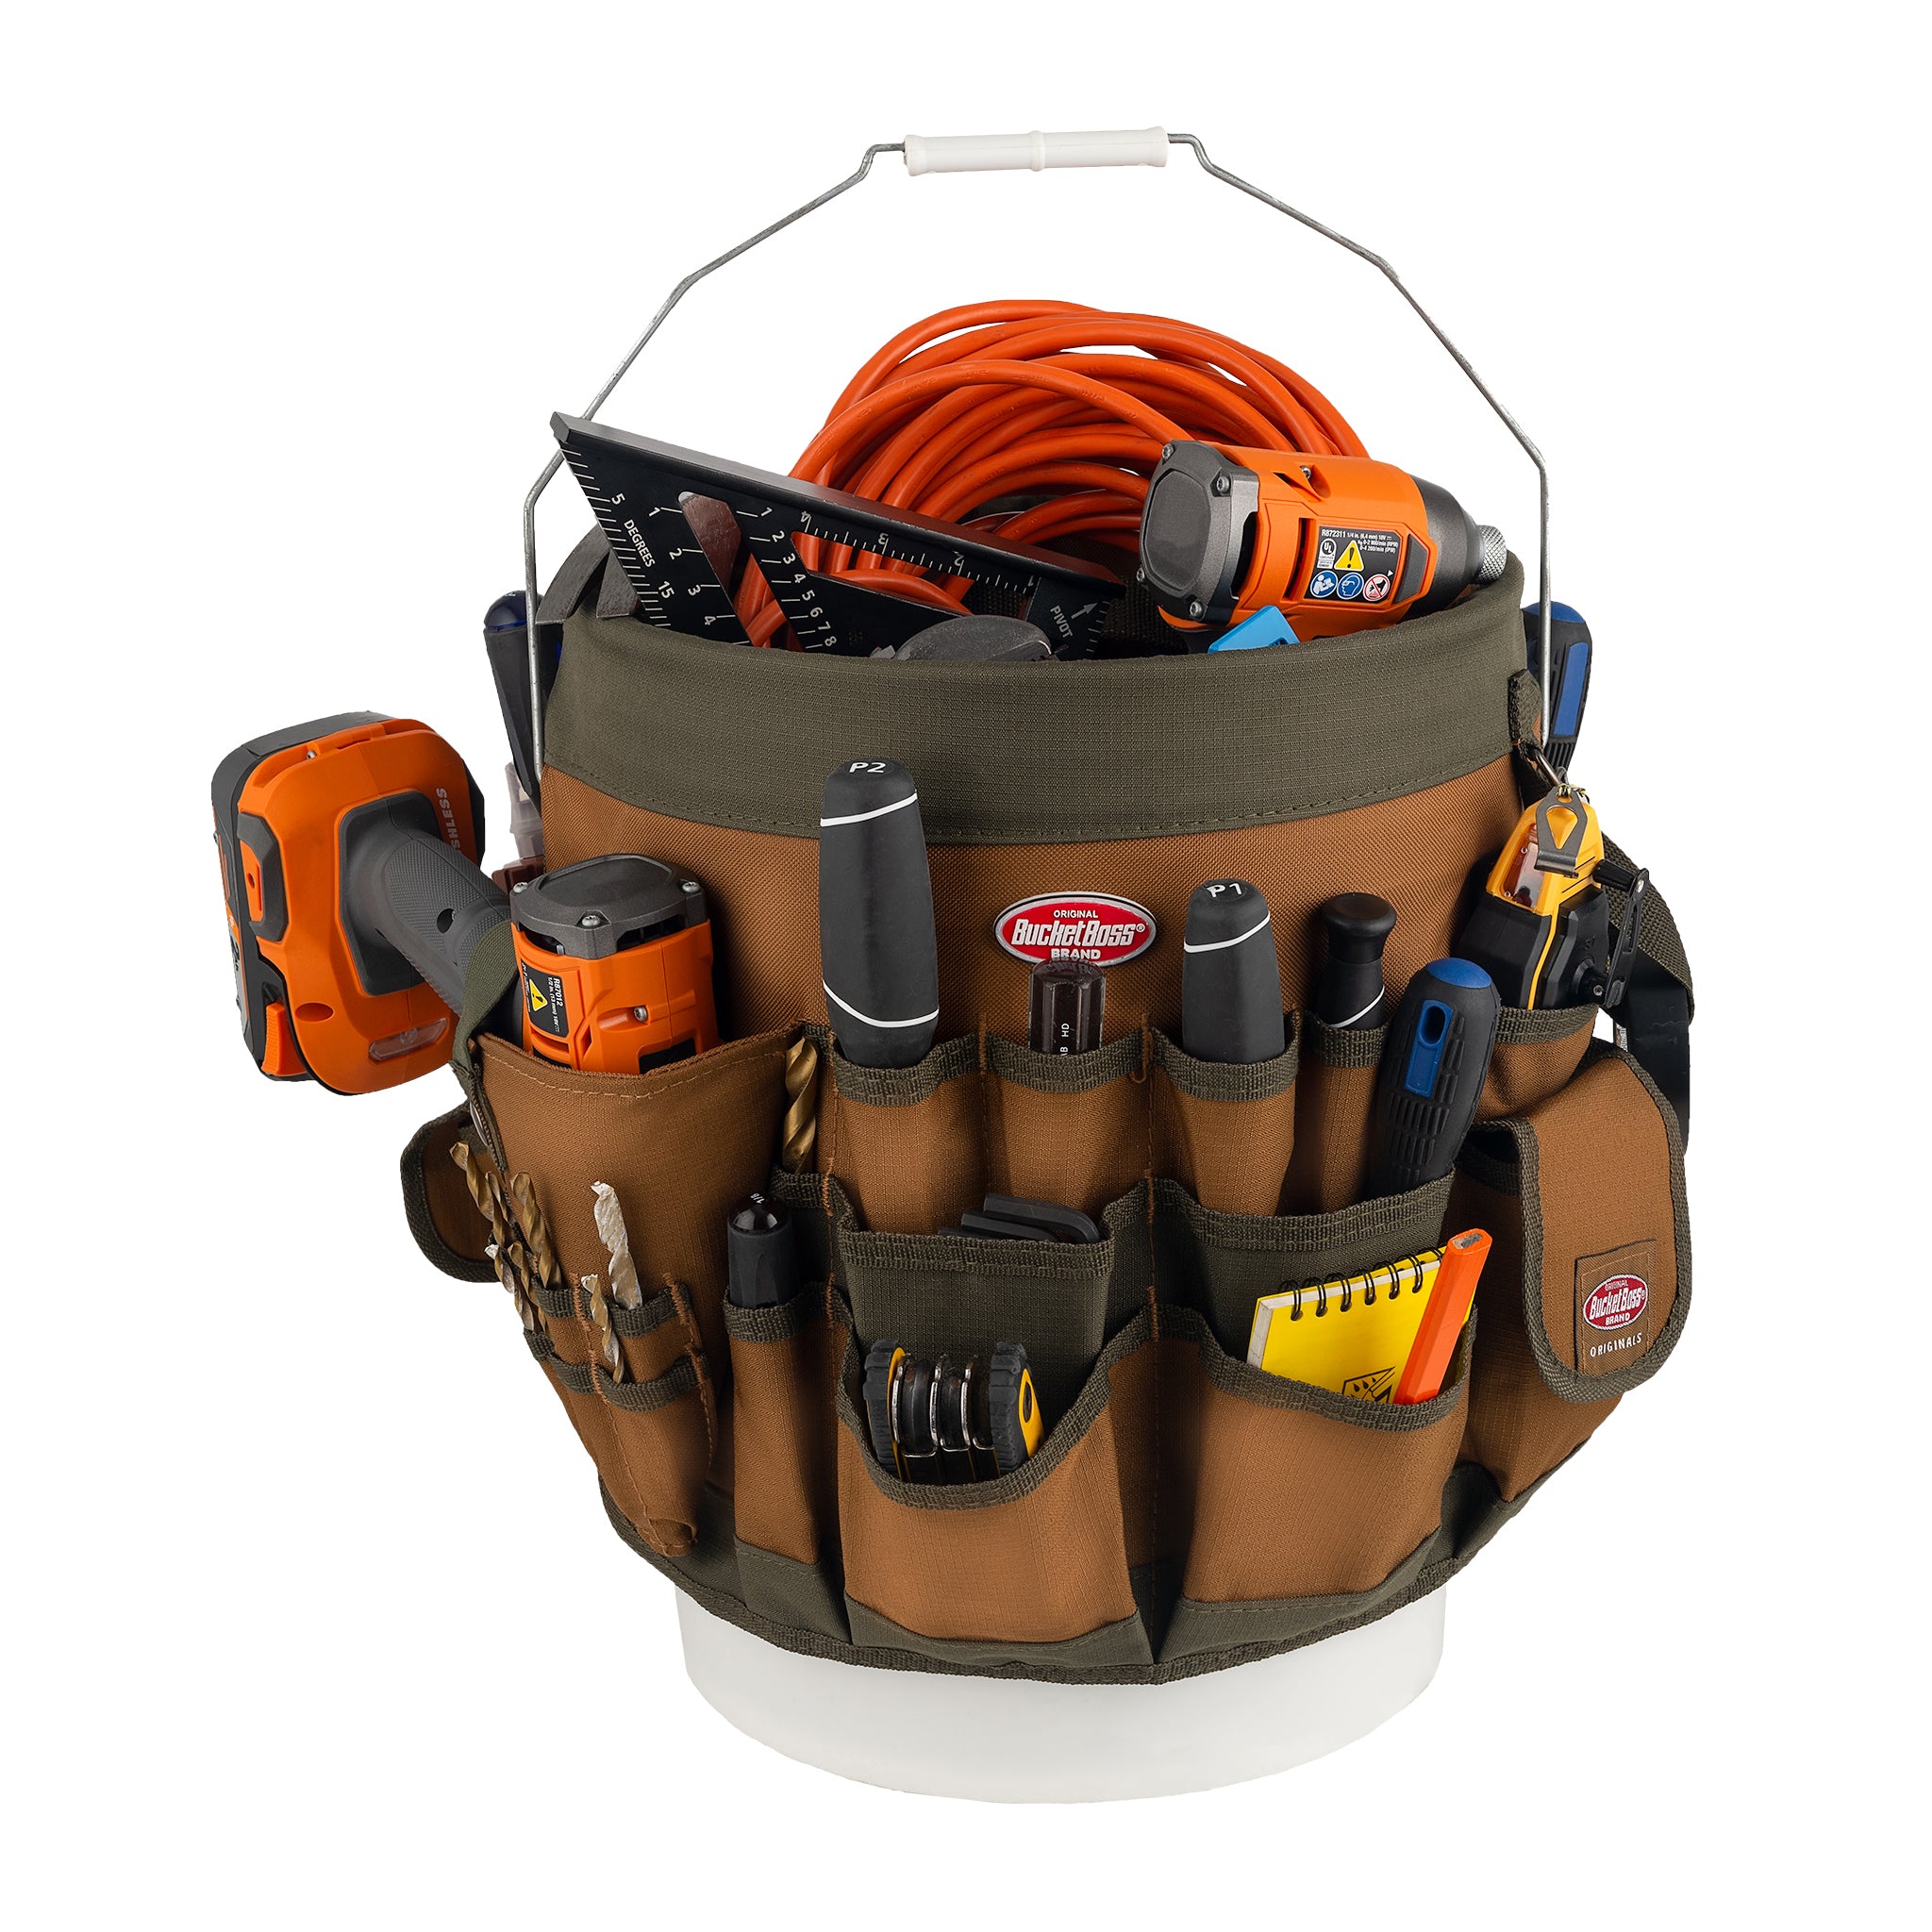 Bucket Boss 10030 The Bucketeer Bucket Tool Organizer, 600D Poly Fabric,  Tools Not Included